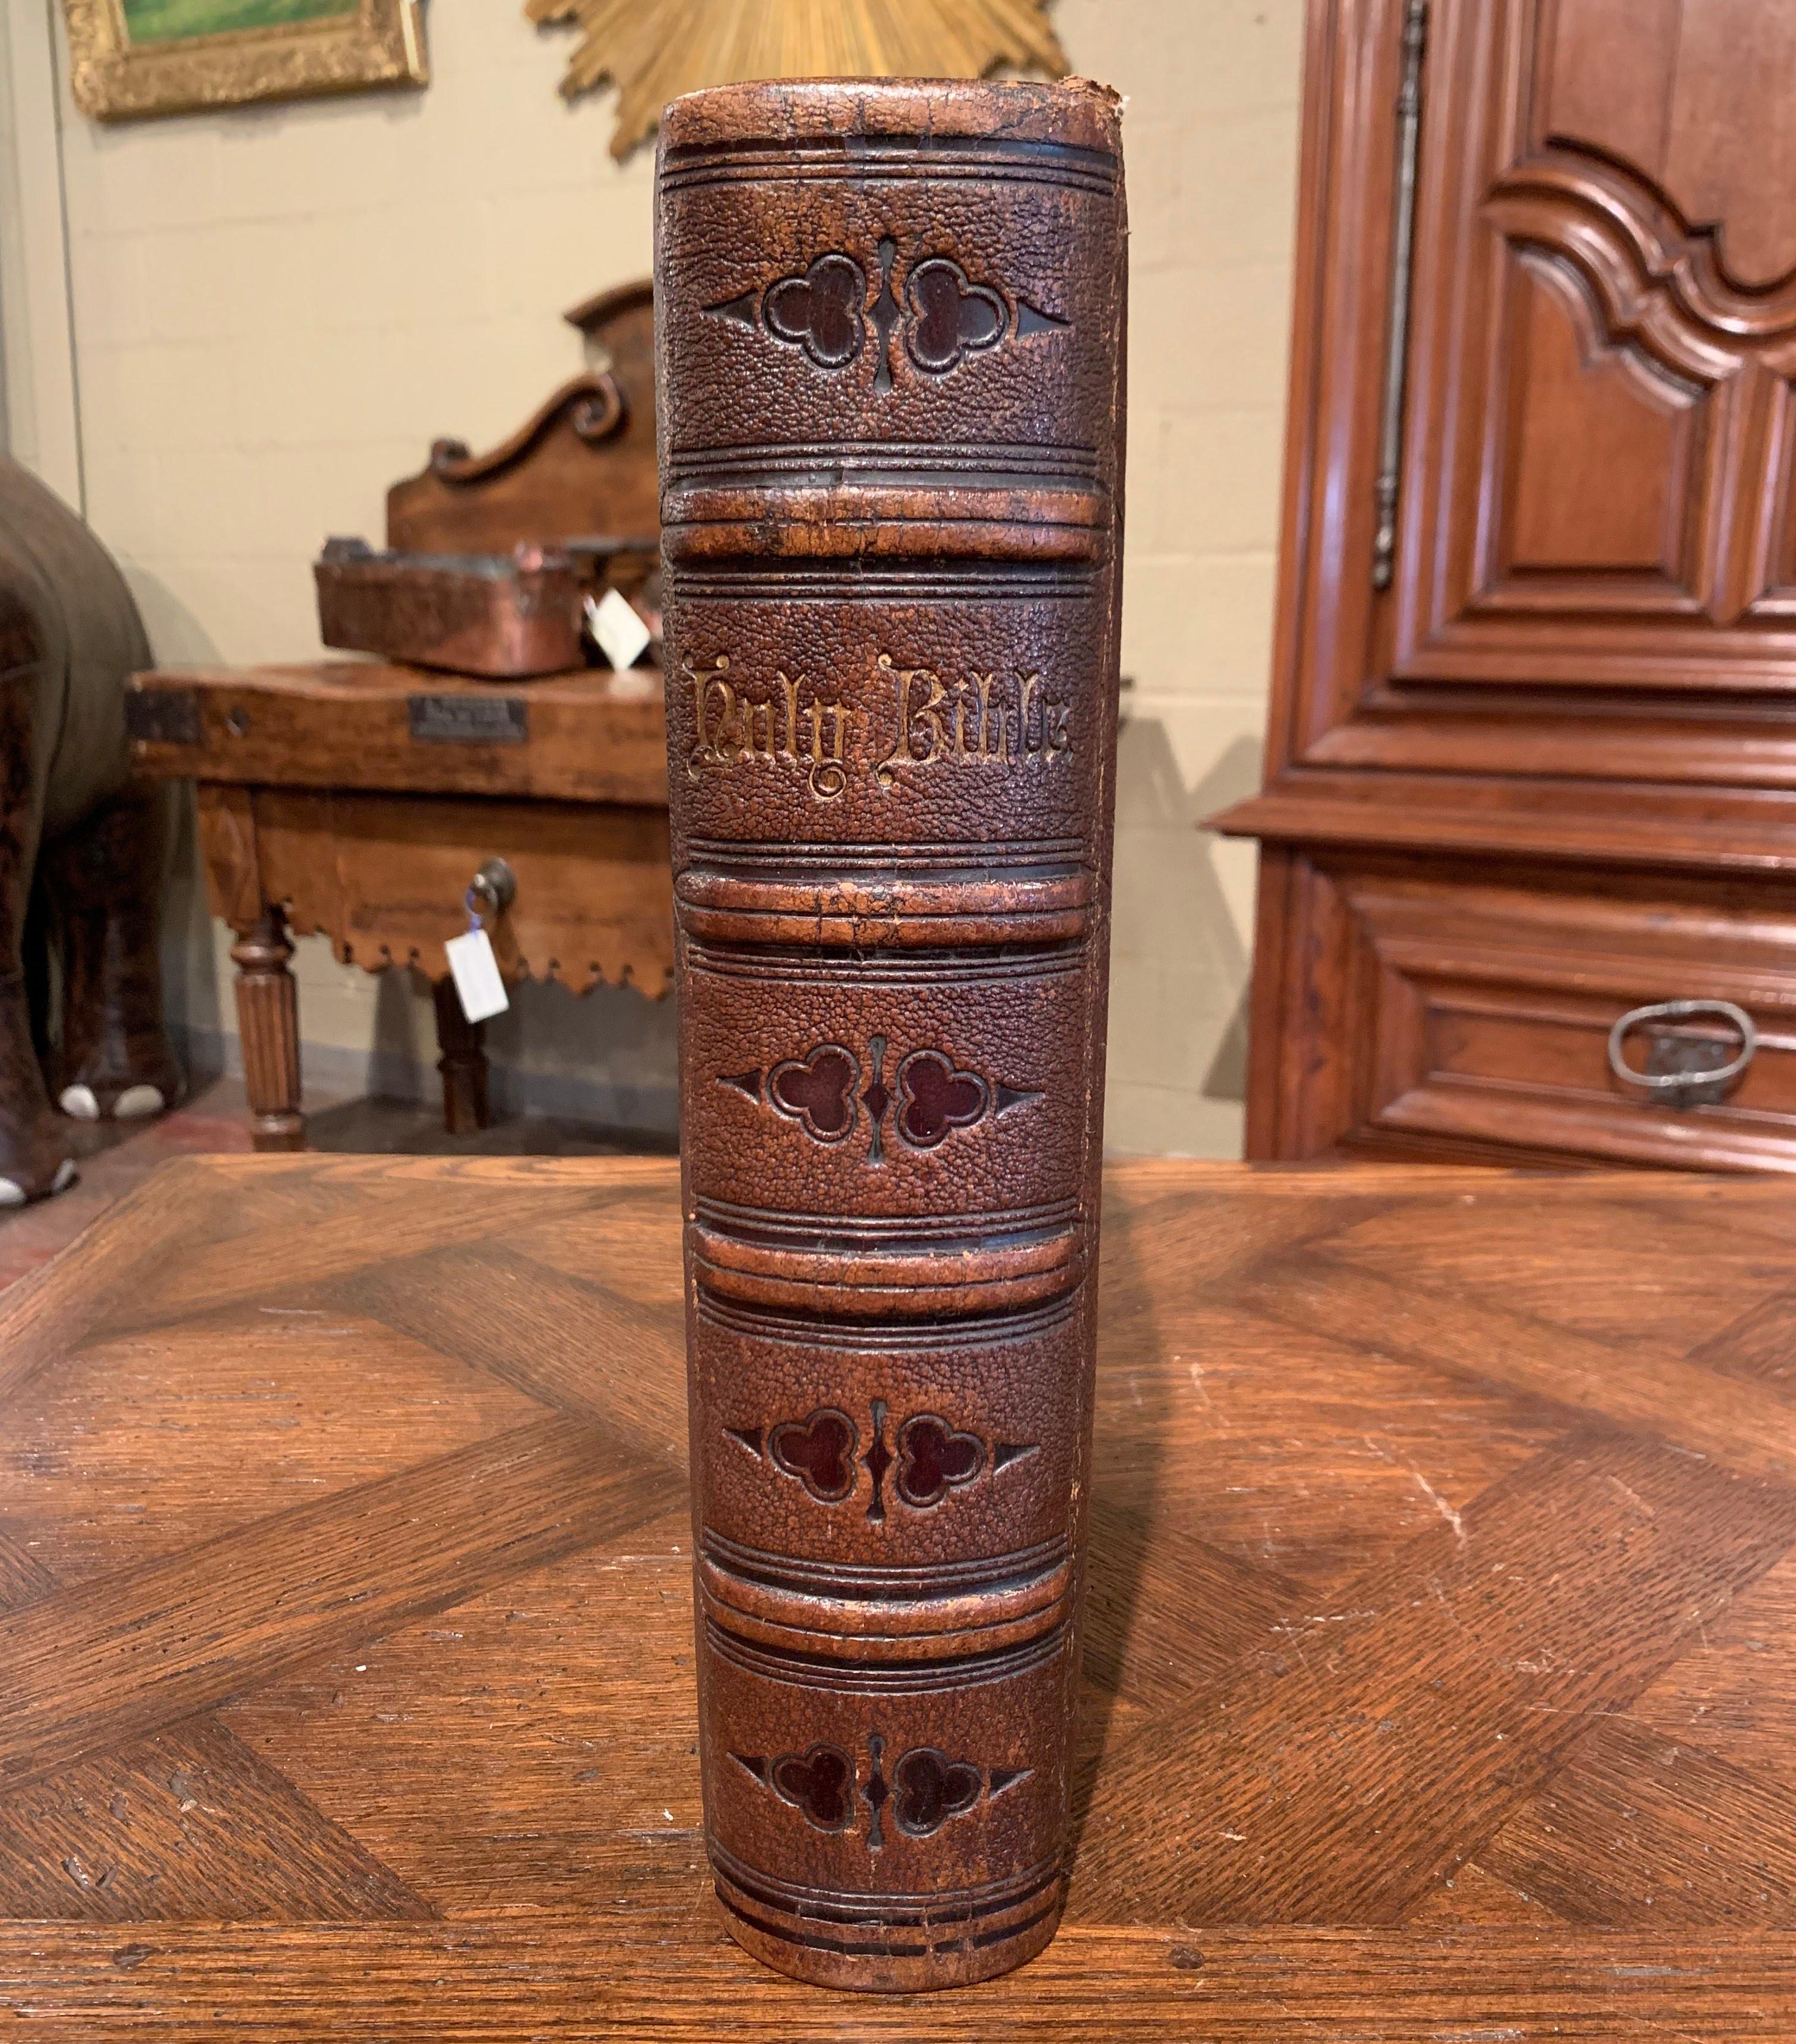 This beautiful antique Bible appointed to be read in churches, was printed at the University Press, Oxford, London and dated 1866. The book flaunts an engraved brown leather and is embellished with gilt edge pages. Inside, the Bible features the old